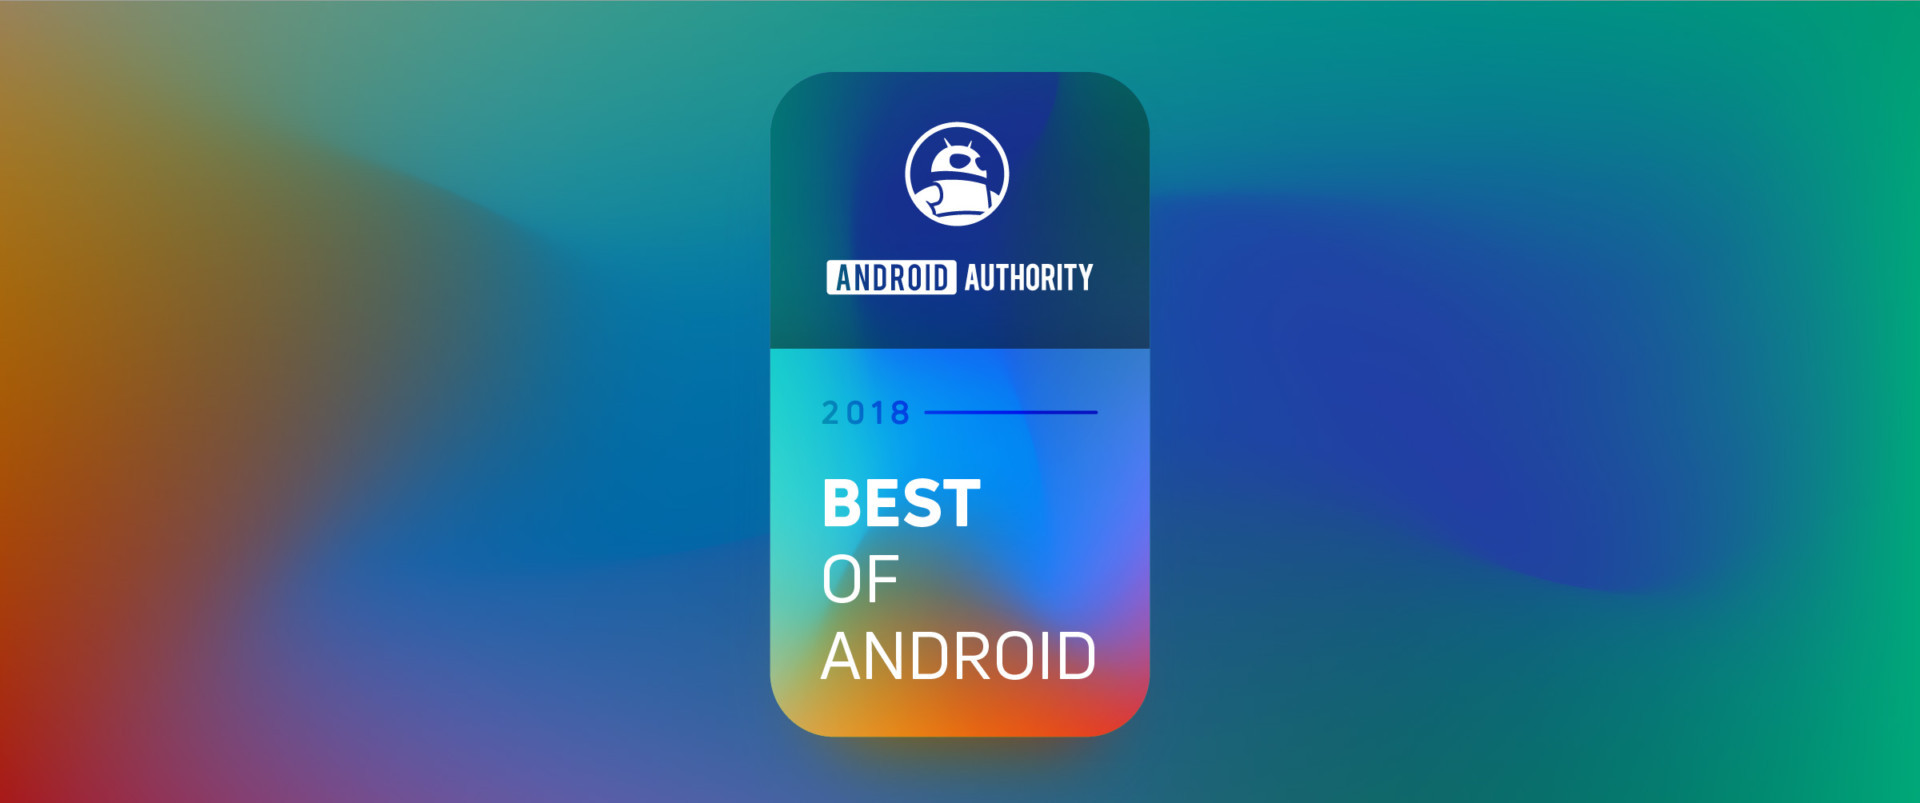 Best of Android 2018 banner.